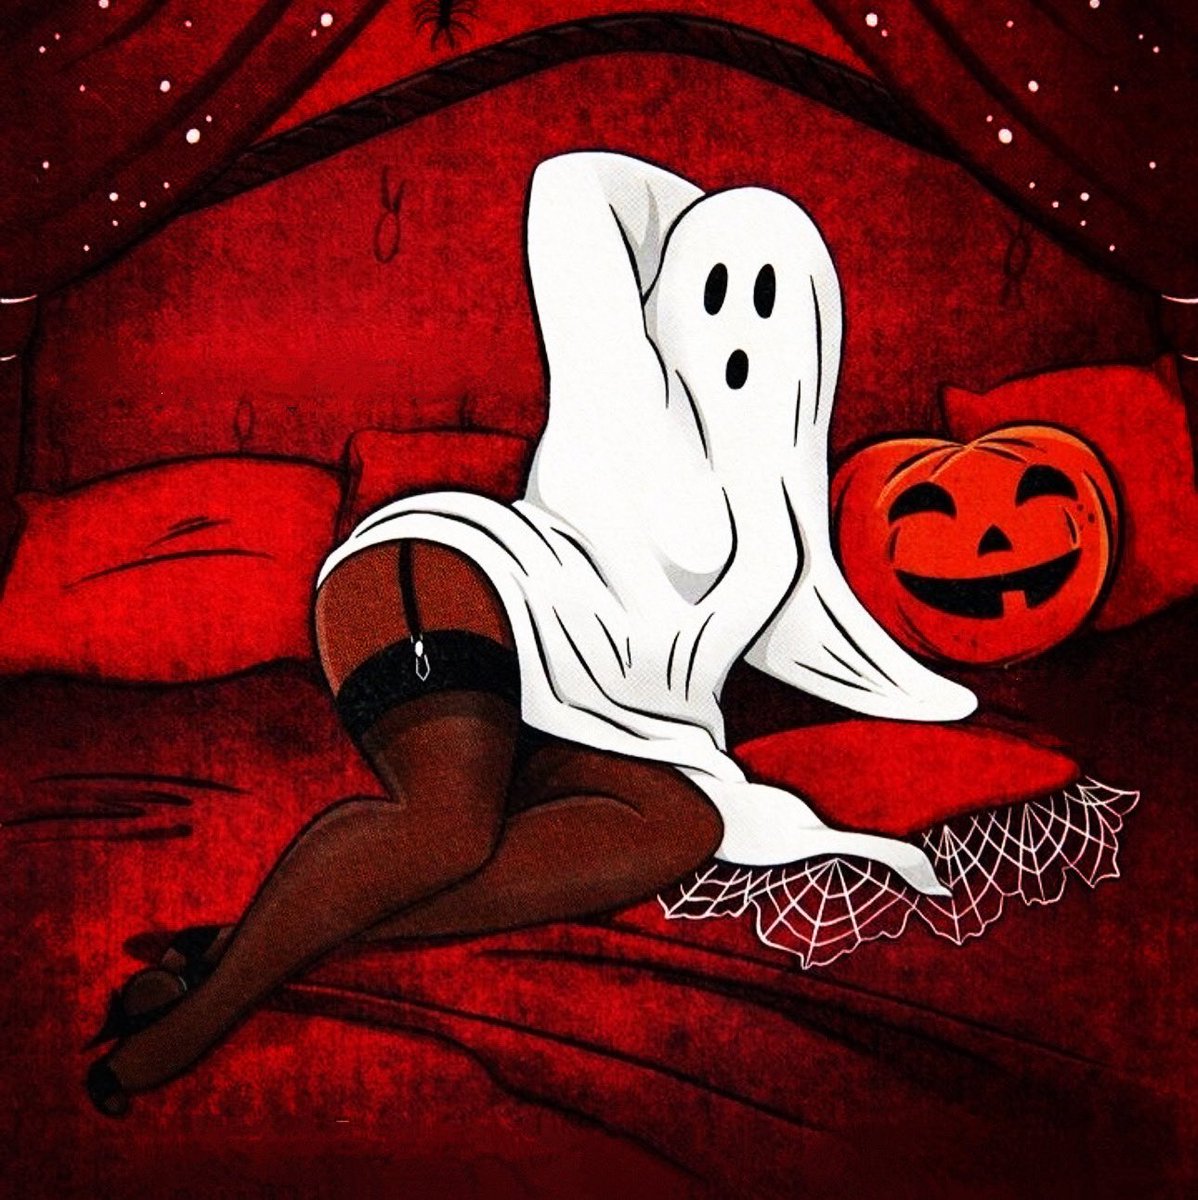 Are your spirits low?
How about a “Boo”doir shoot?
You’ll be haunting their dreams!
🖤👻🕸️🎃❤️🎃🕸️👻🖤
#halloween #HalloweenIsCalling #halloweenforever #spookyfam #itsalifestyle #1031club #ghost #boudoir #haunting #spirits #liftyourspirits #glam #beautiful #spooky #selflove